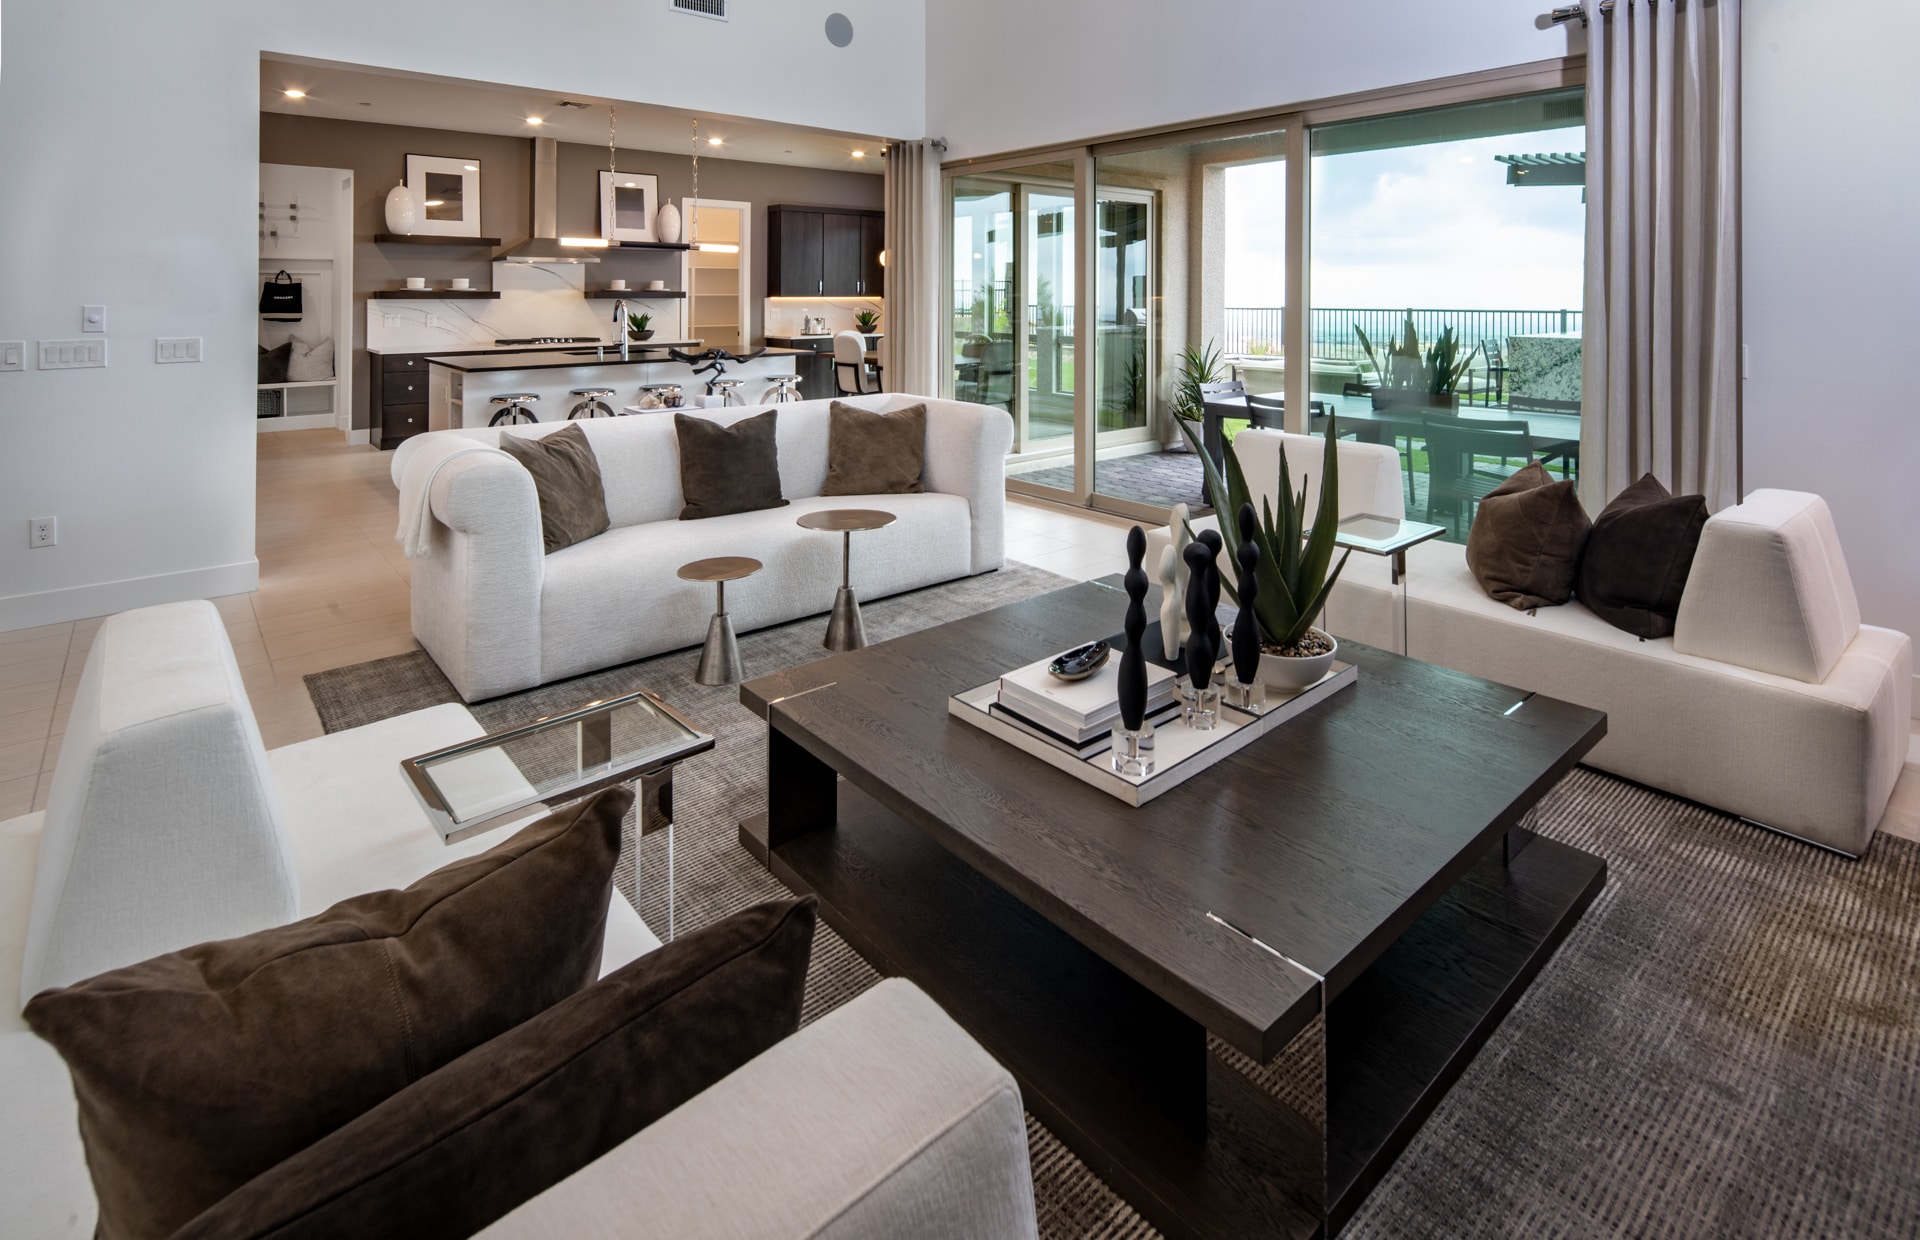 Living Room of Pesaro Model at Carmel Cliff by Pulte Homes